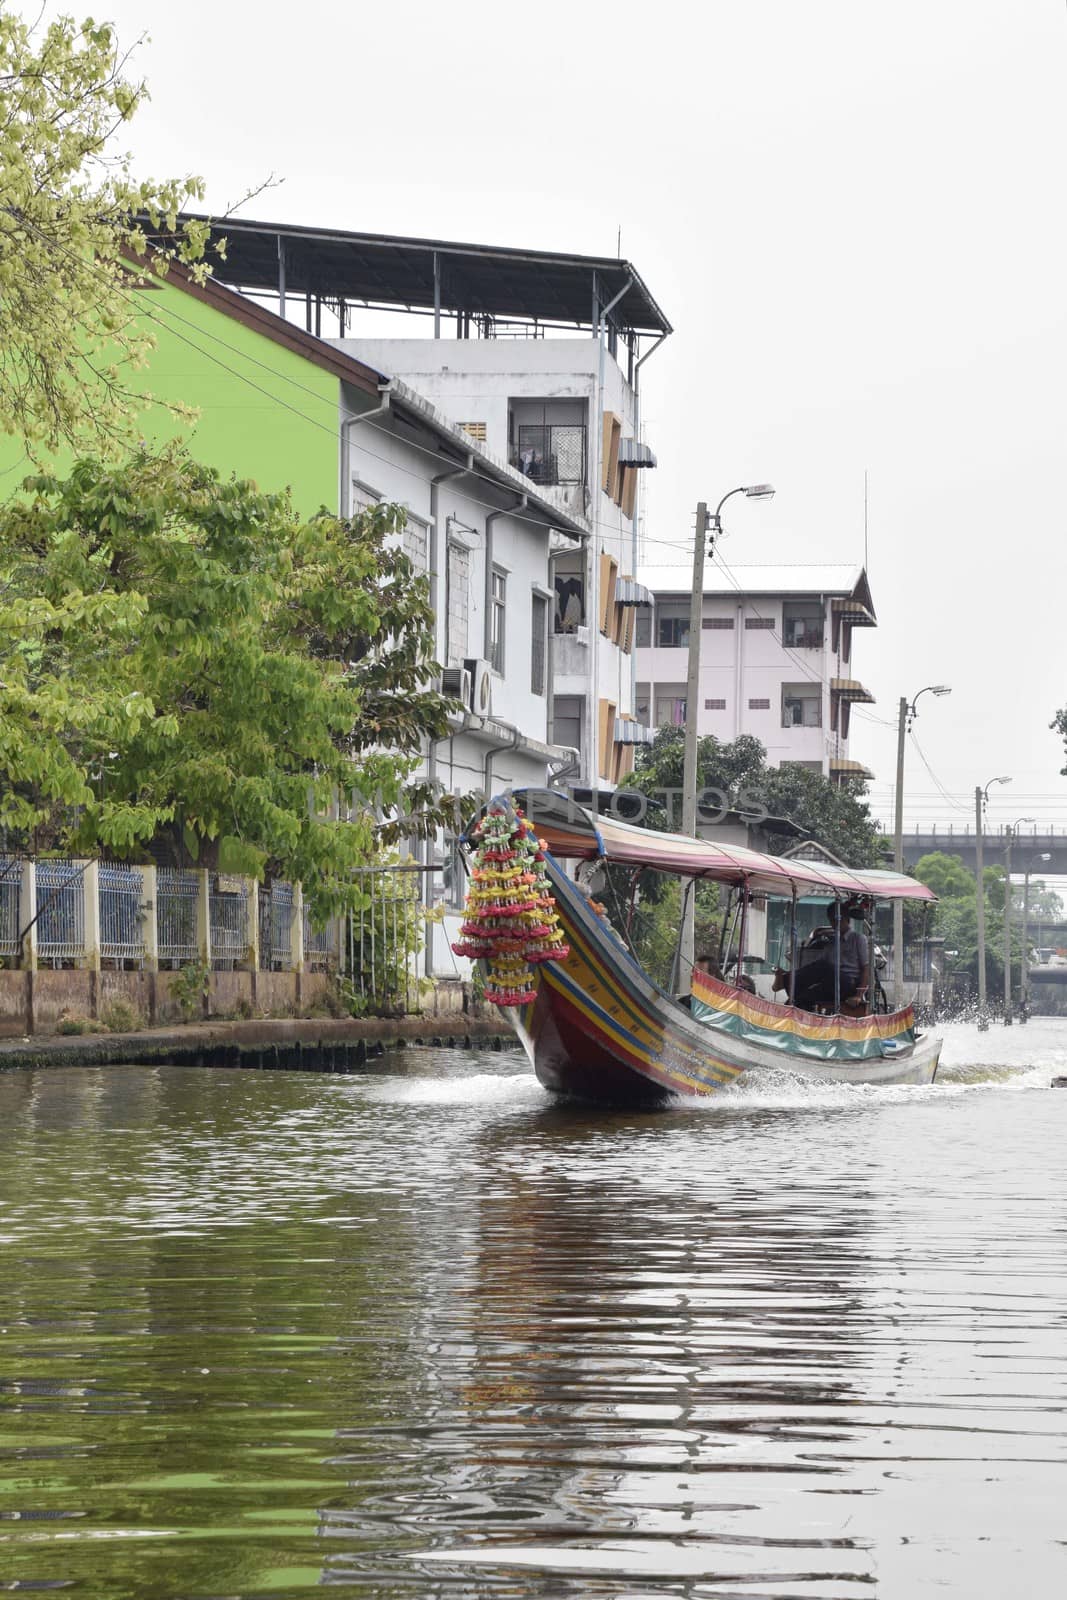 Thailand, Bangkok - March 2016: Longtail taxi boat traveling along the side canals of the city